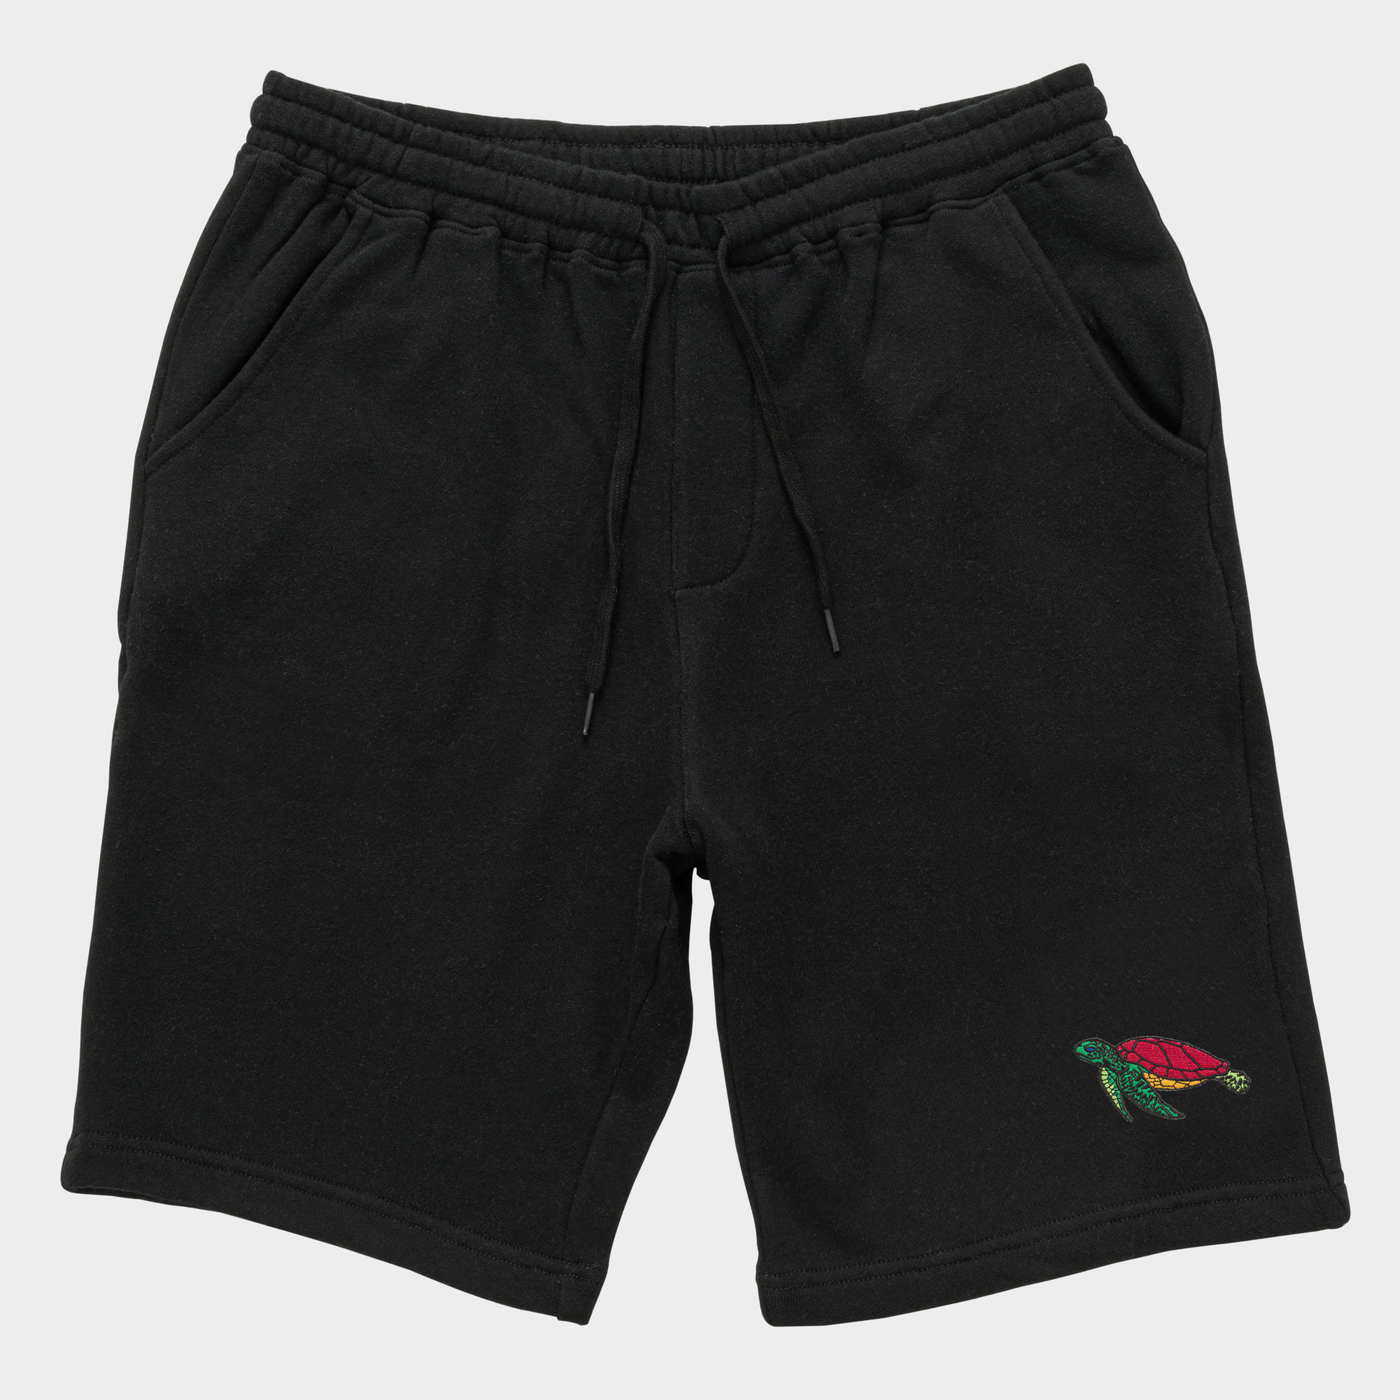 Bobby's Planet Men's Embroidered Sea Turtle Shorts from Seven Seas Fish Animals Collection in Black Color#color_black